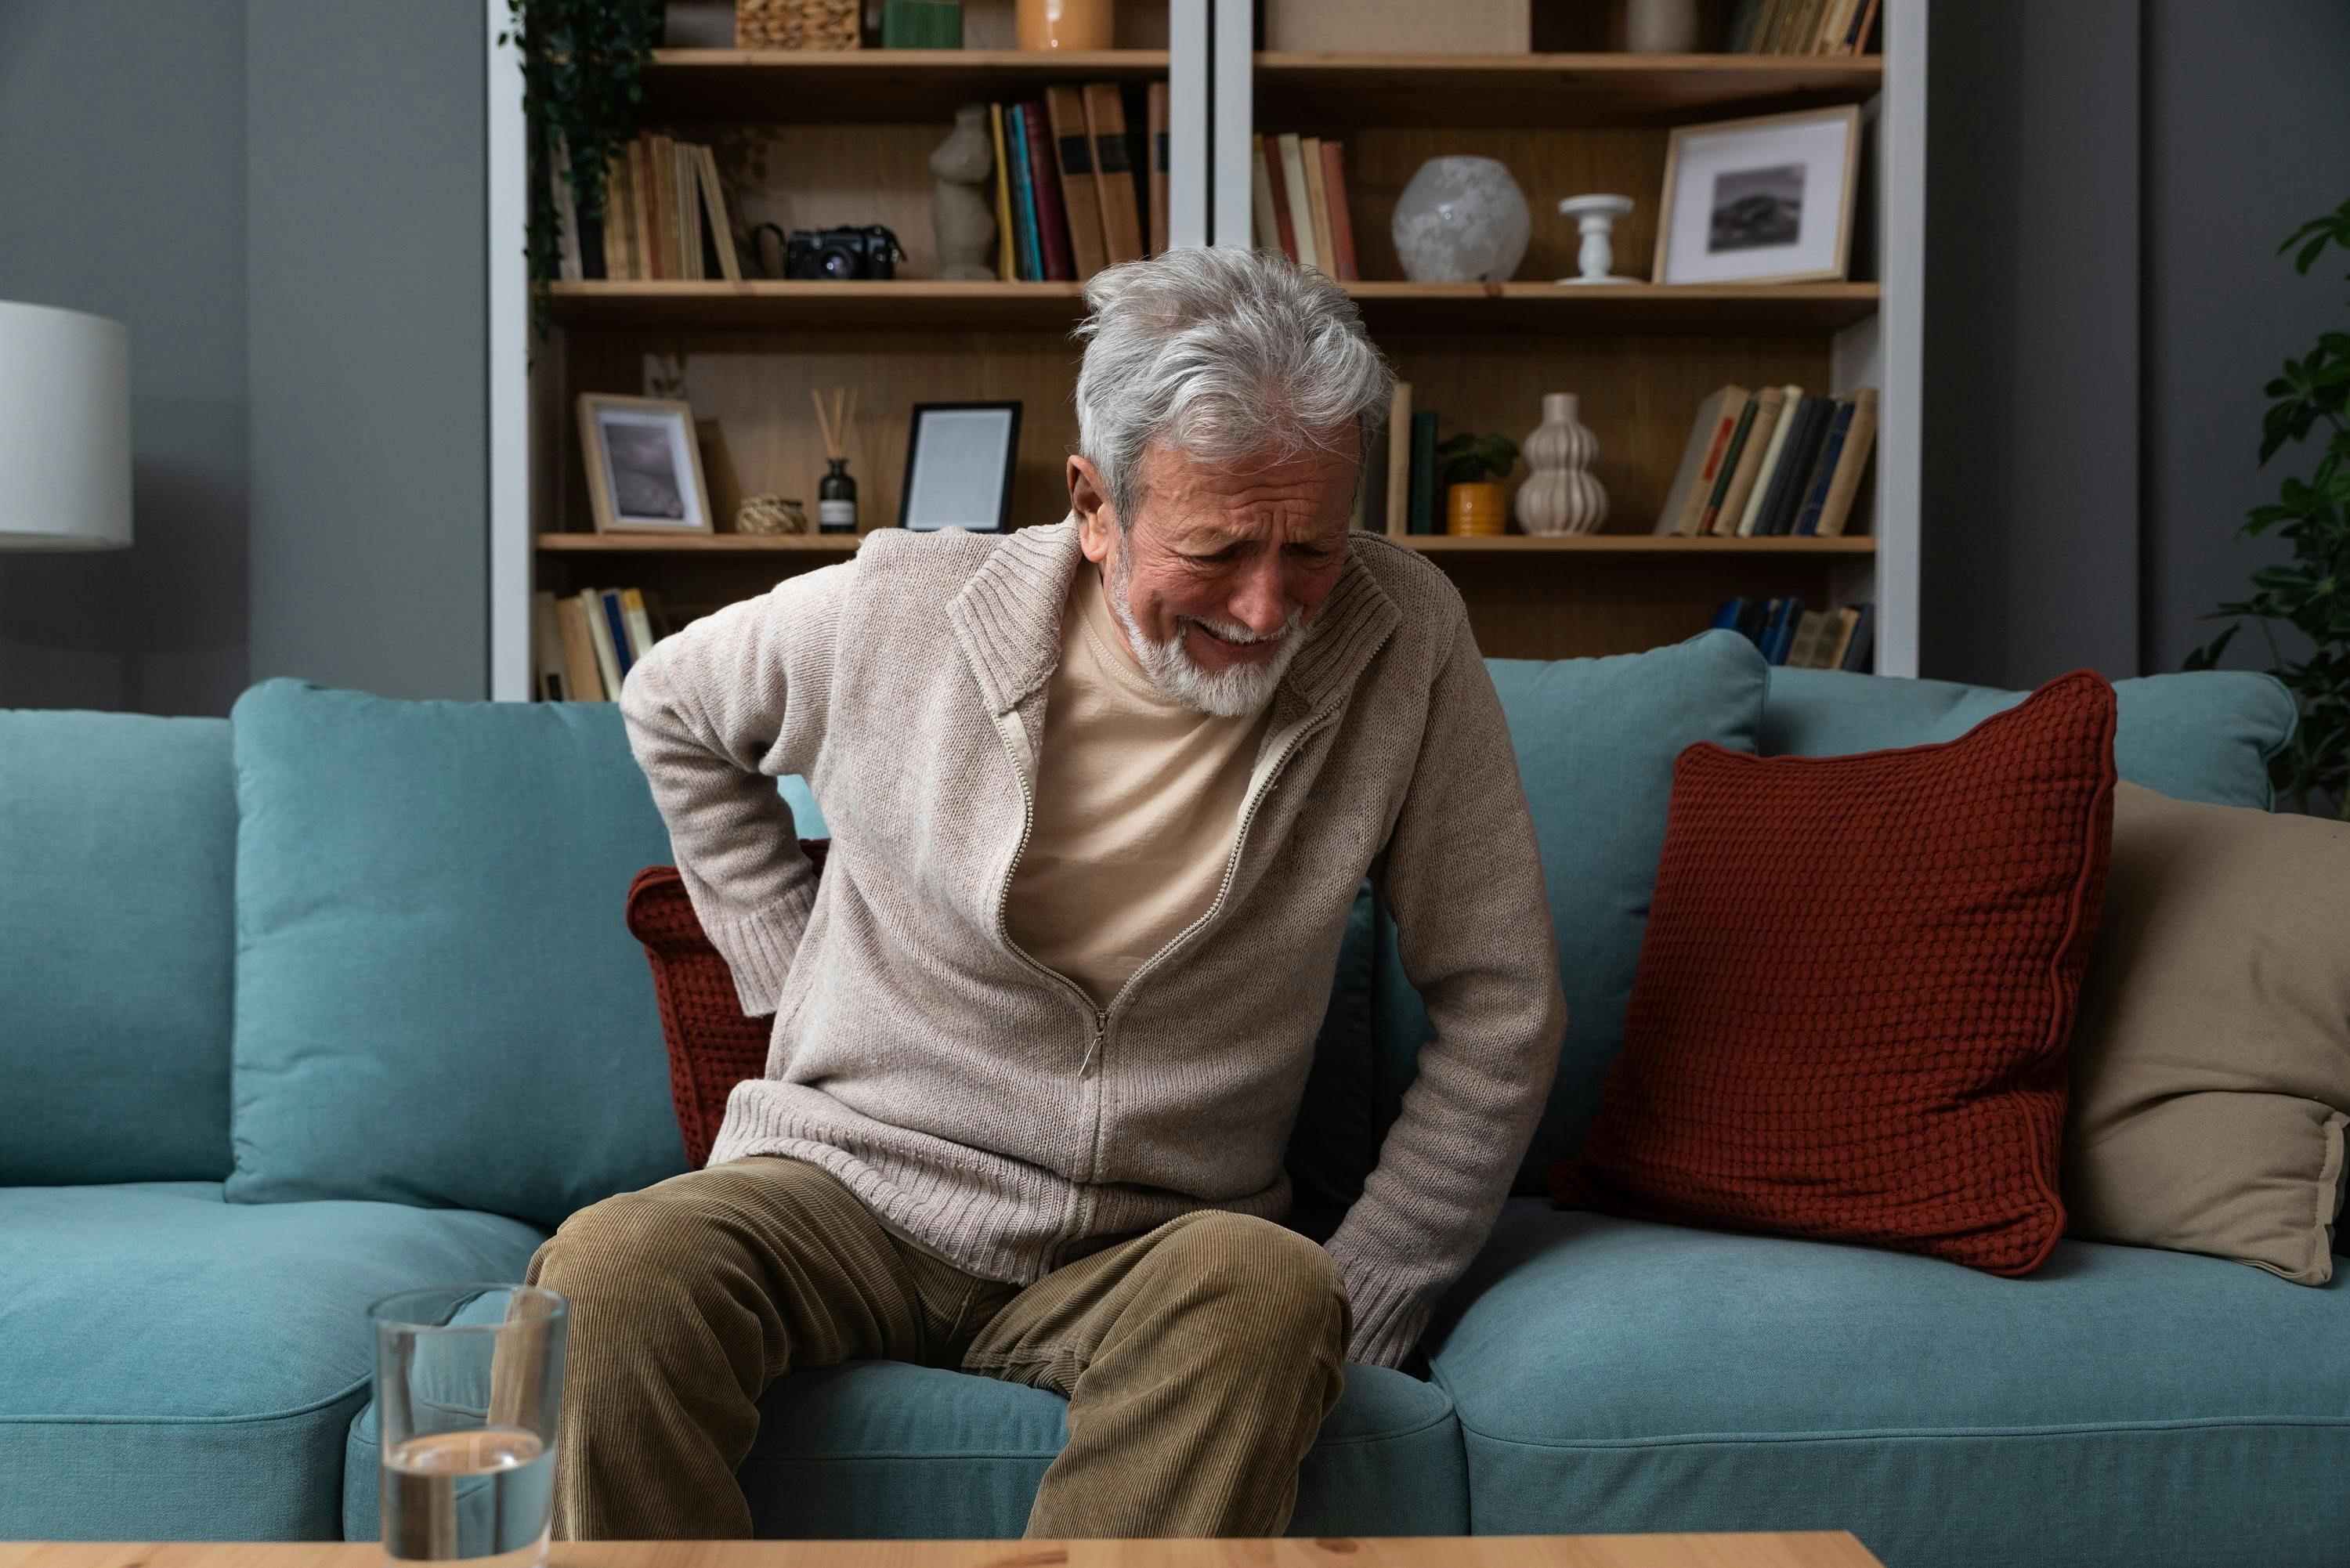 Elderly man with back pain sitting on a sofa in the living room.